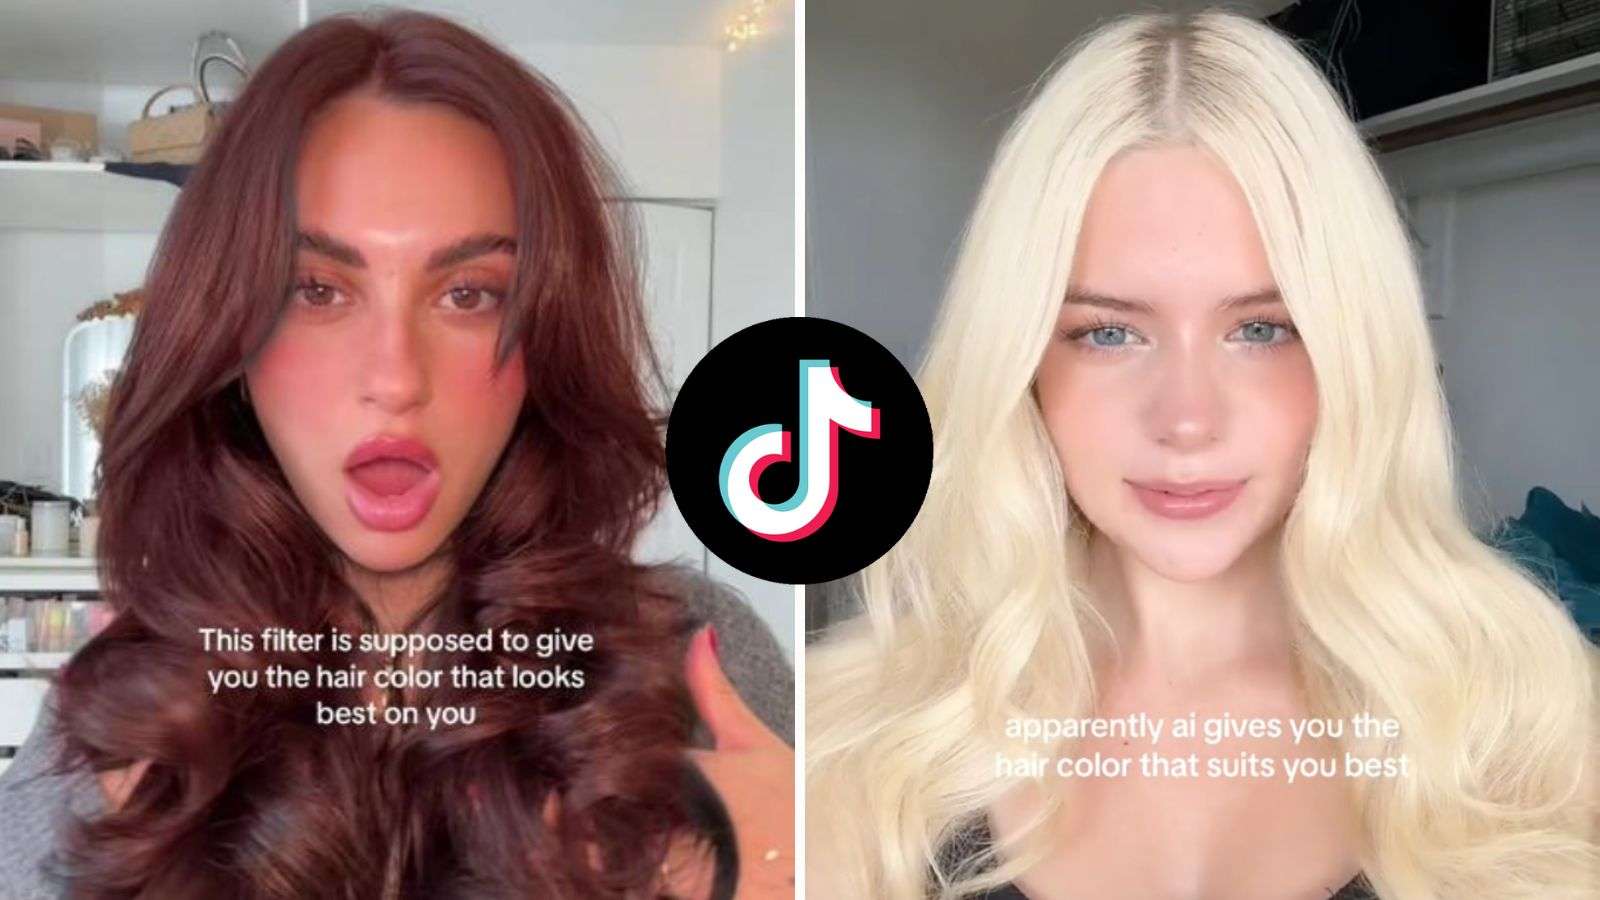 How to get the AI hair color filter on TikTok